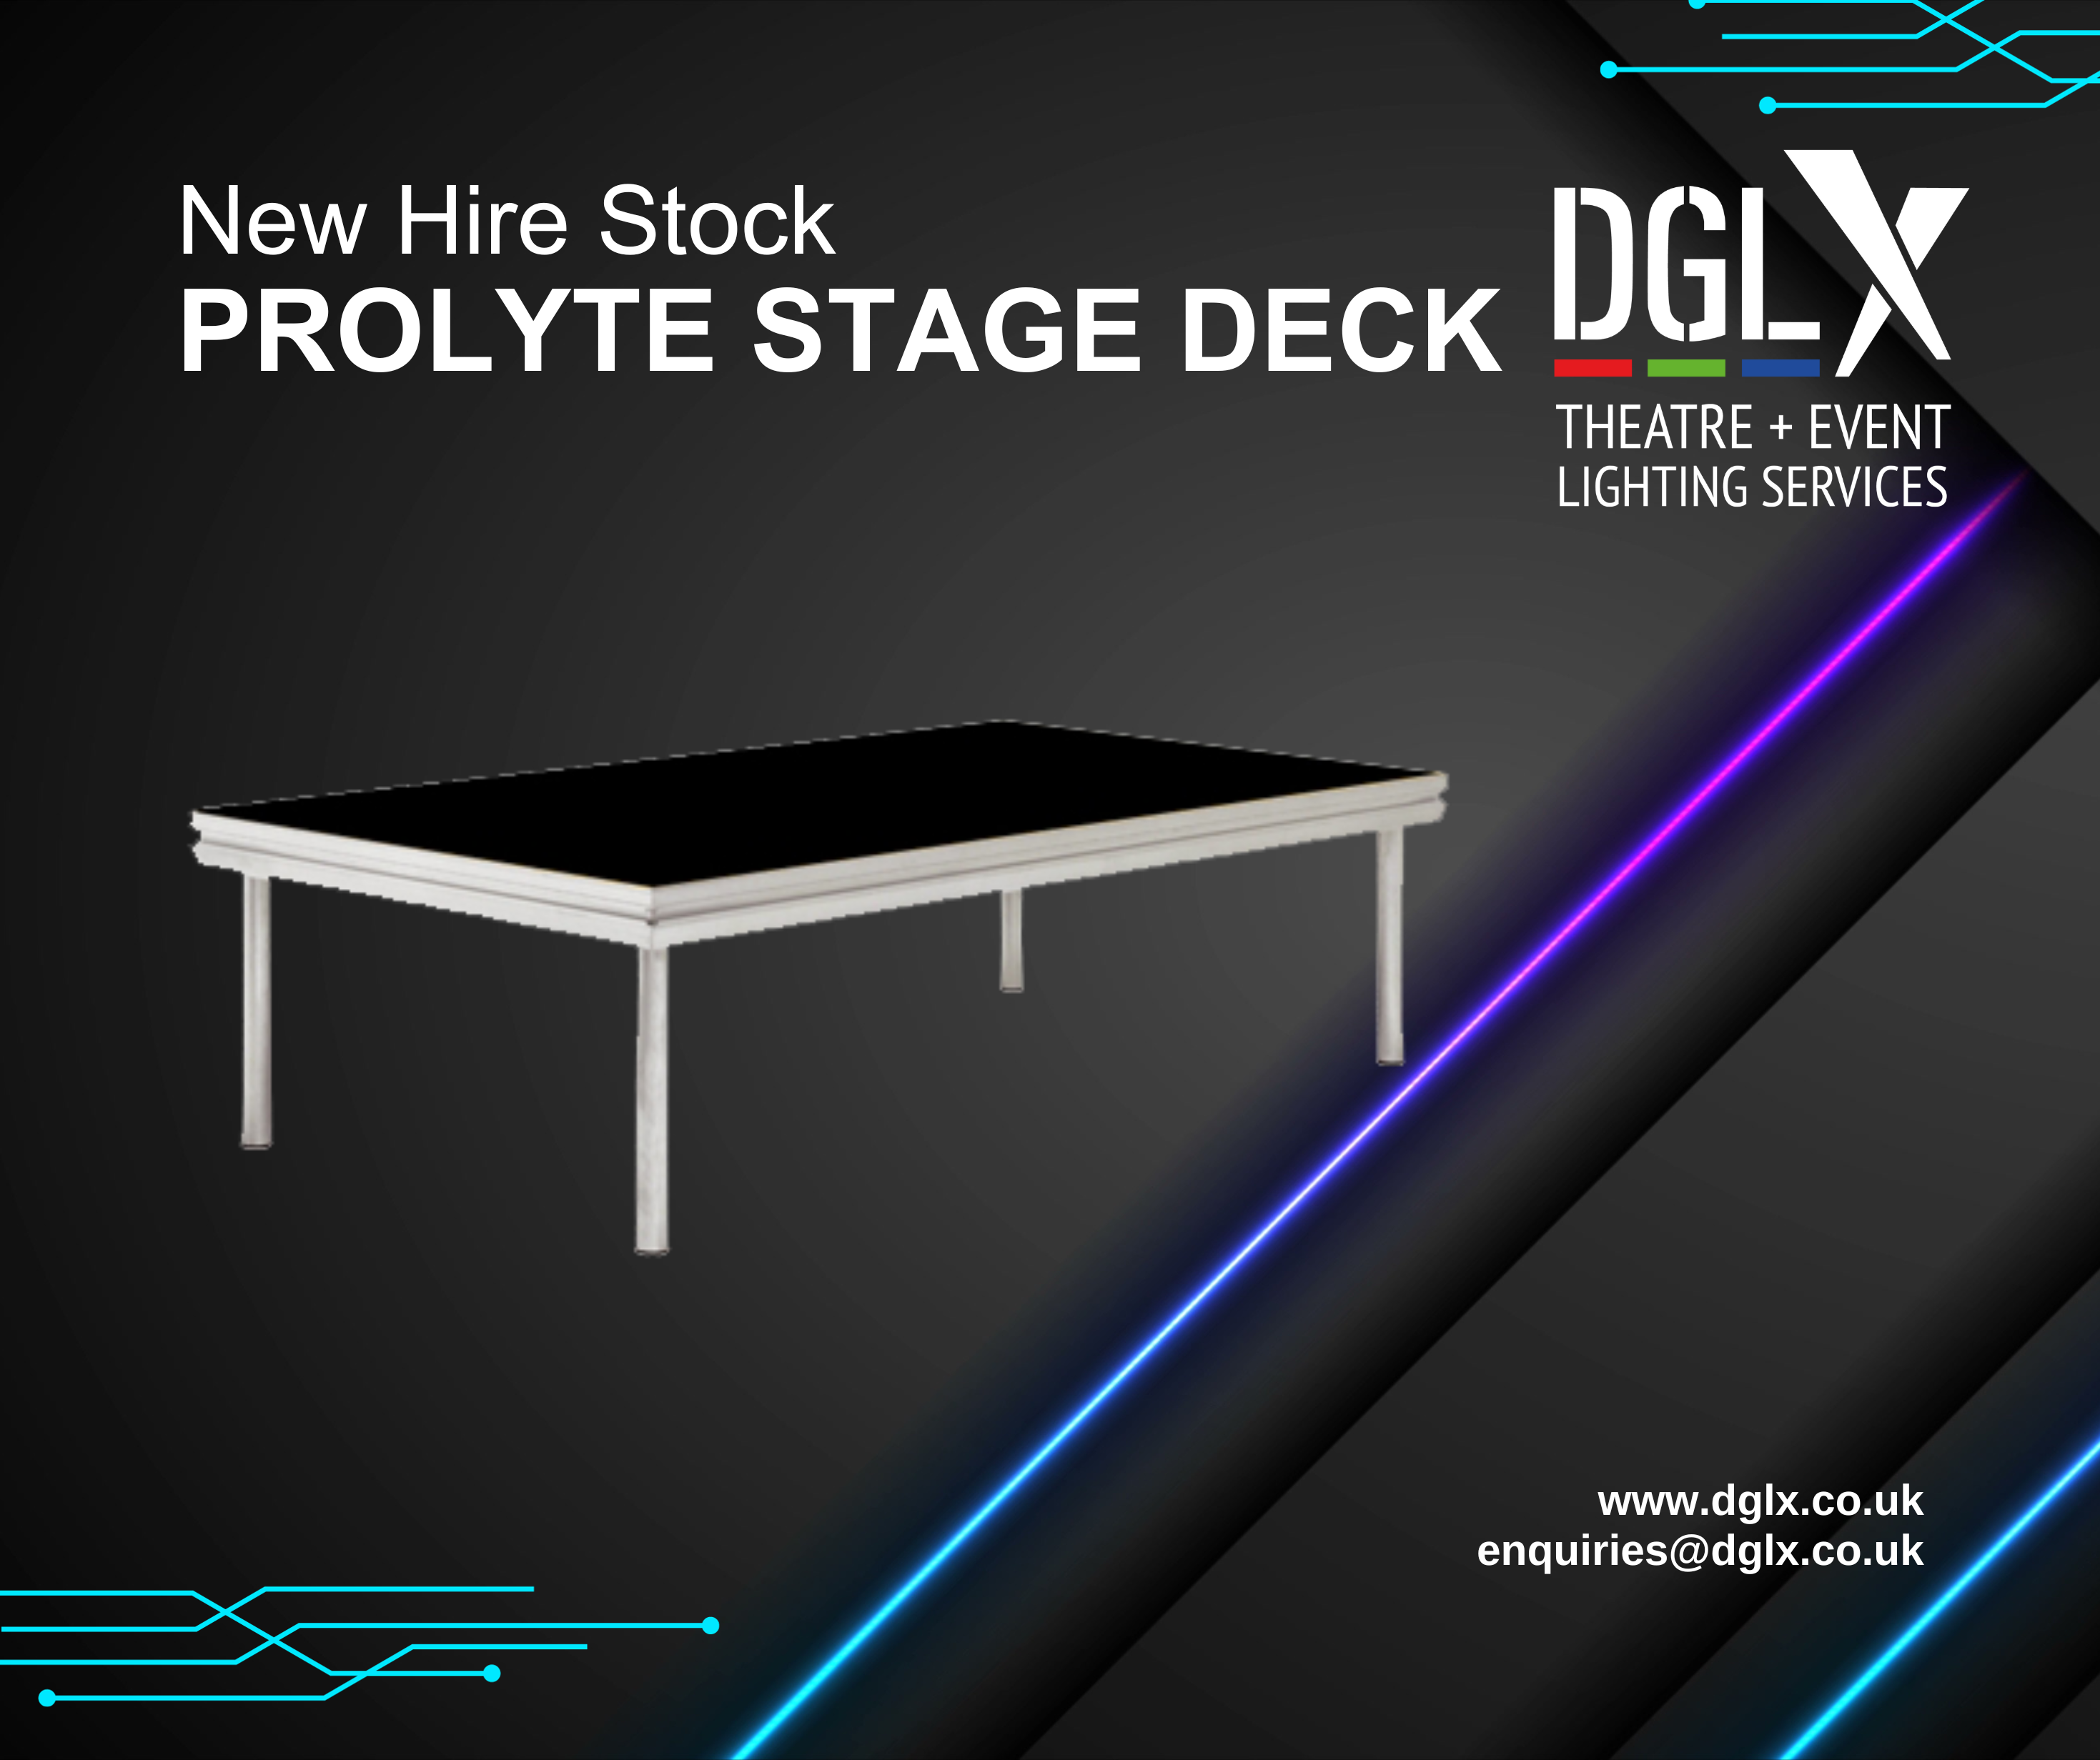 Prolyte Stage Deck Now in Stock